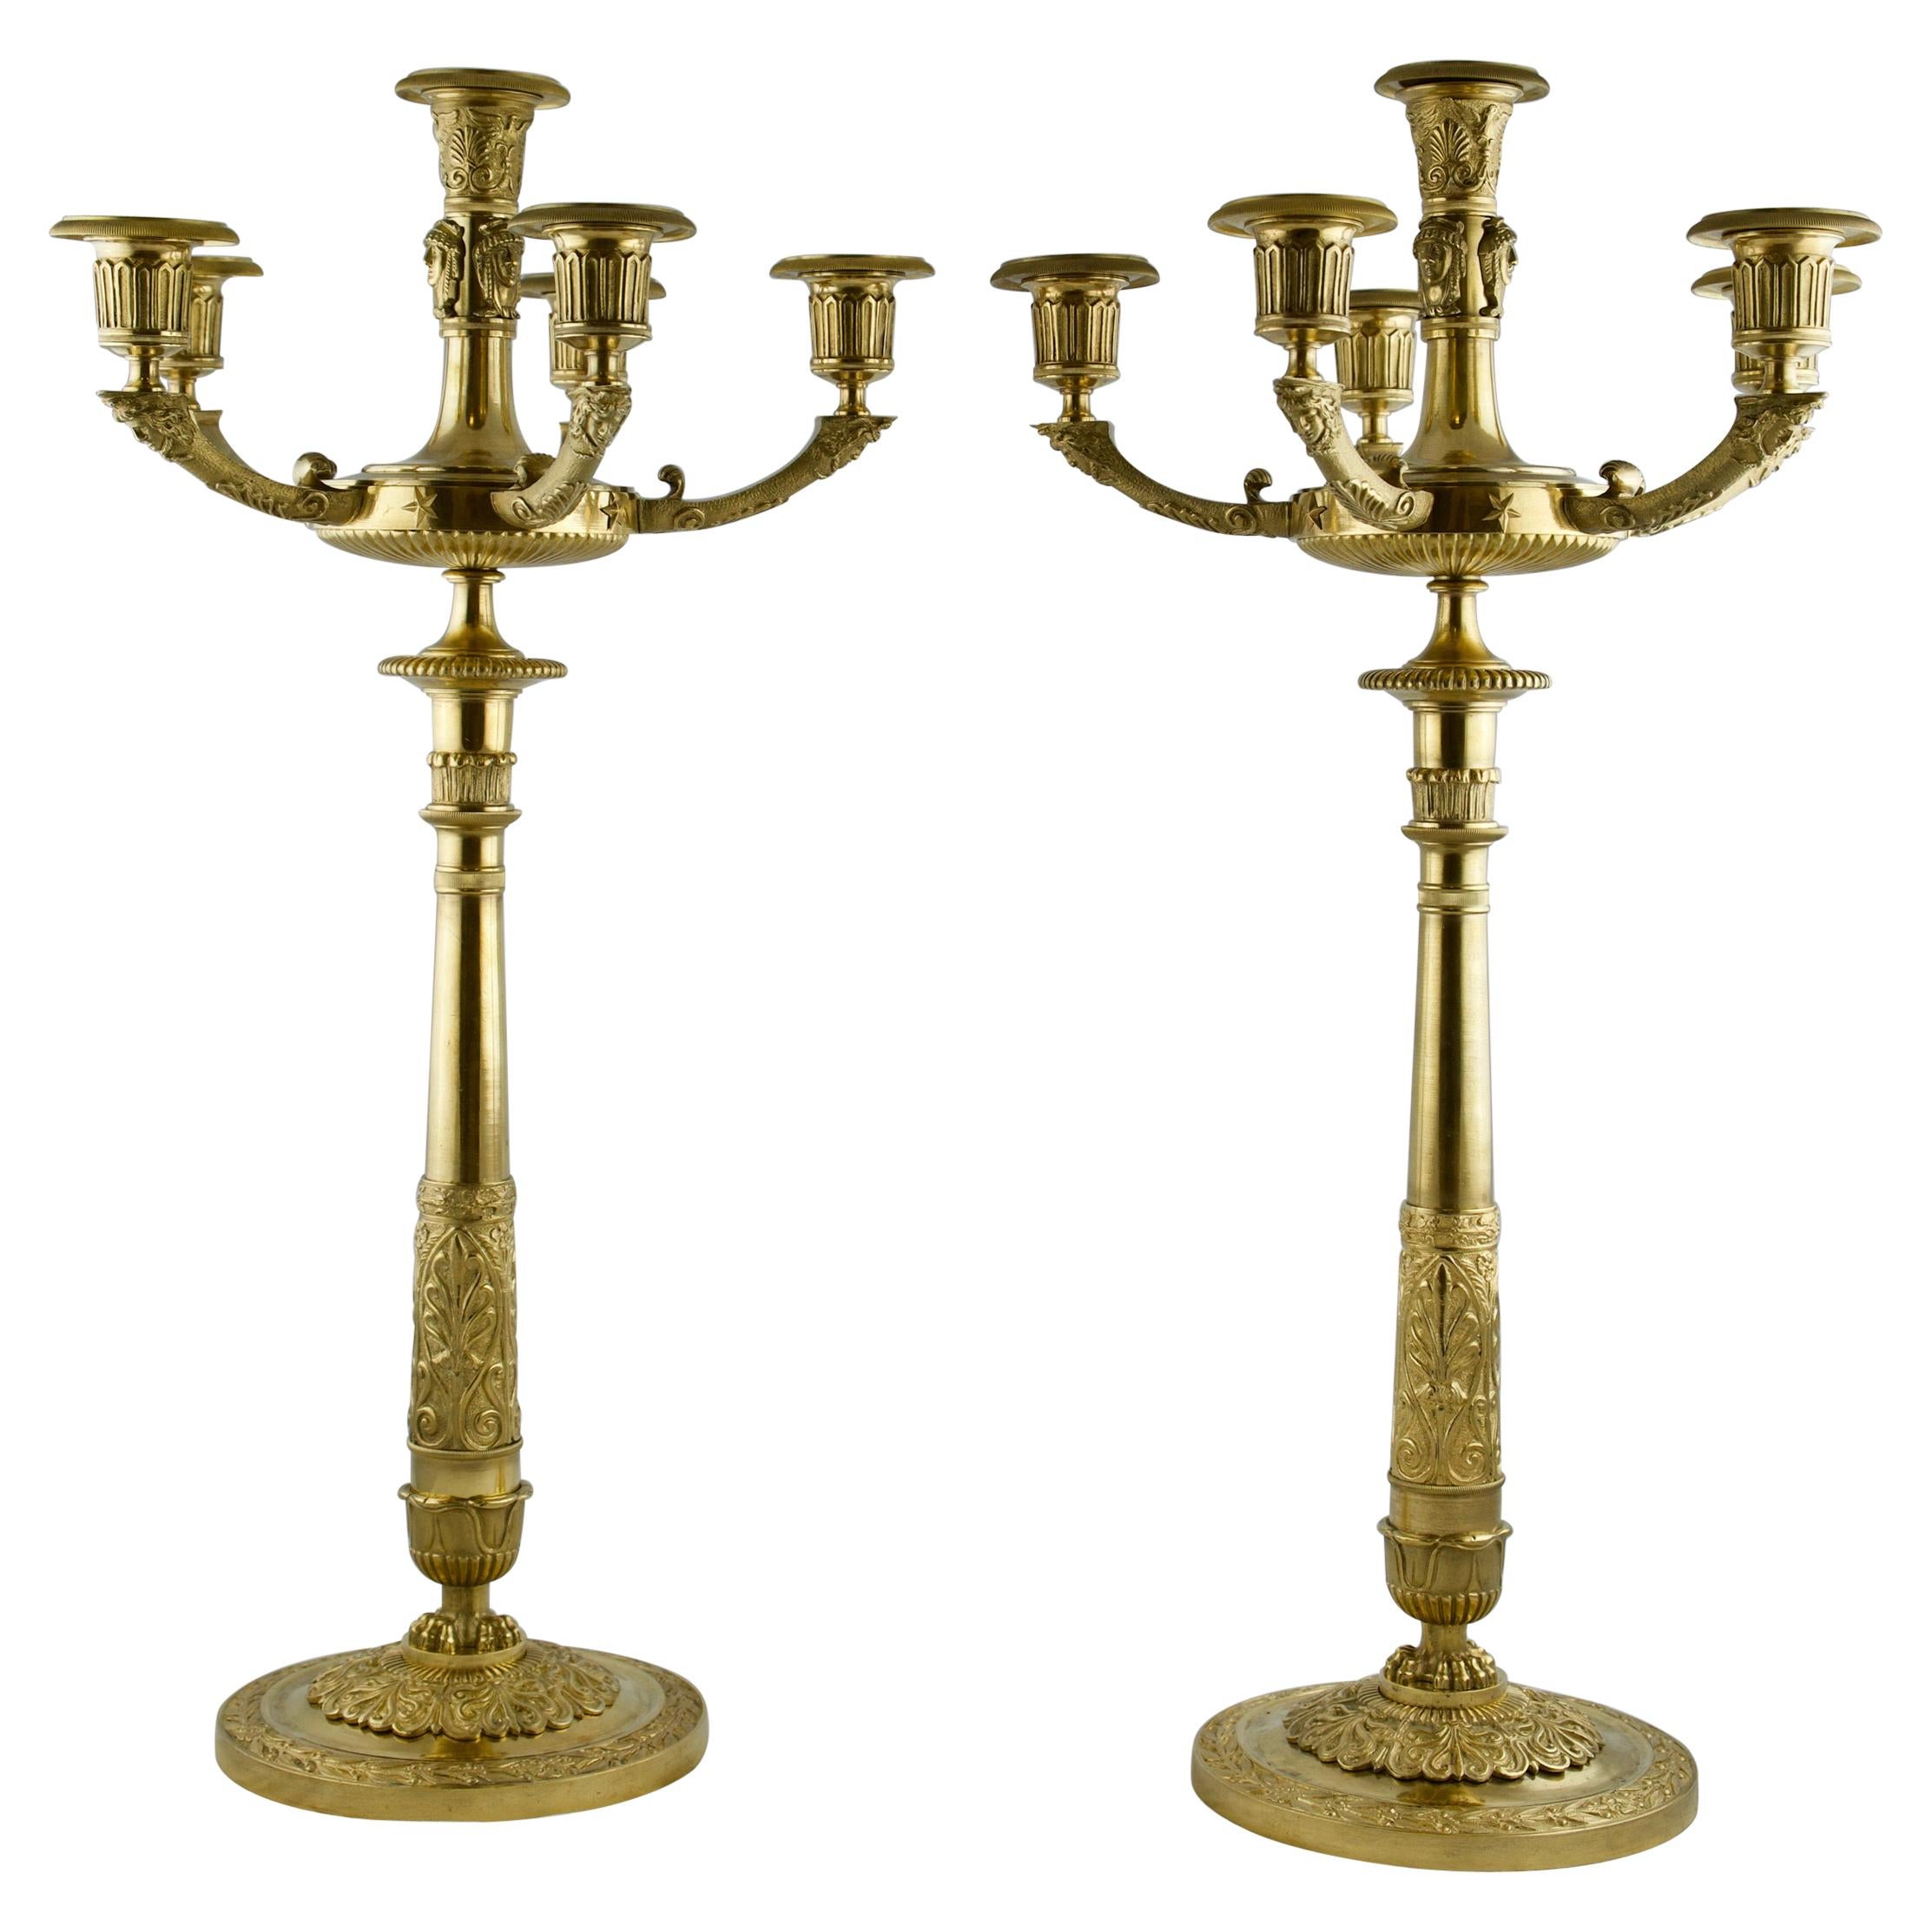 Pair of French Empire Gilt Candelabra, Early 19th C